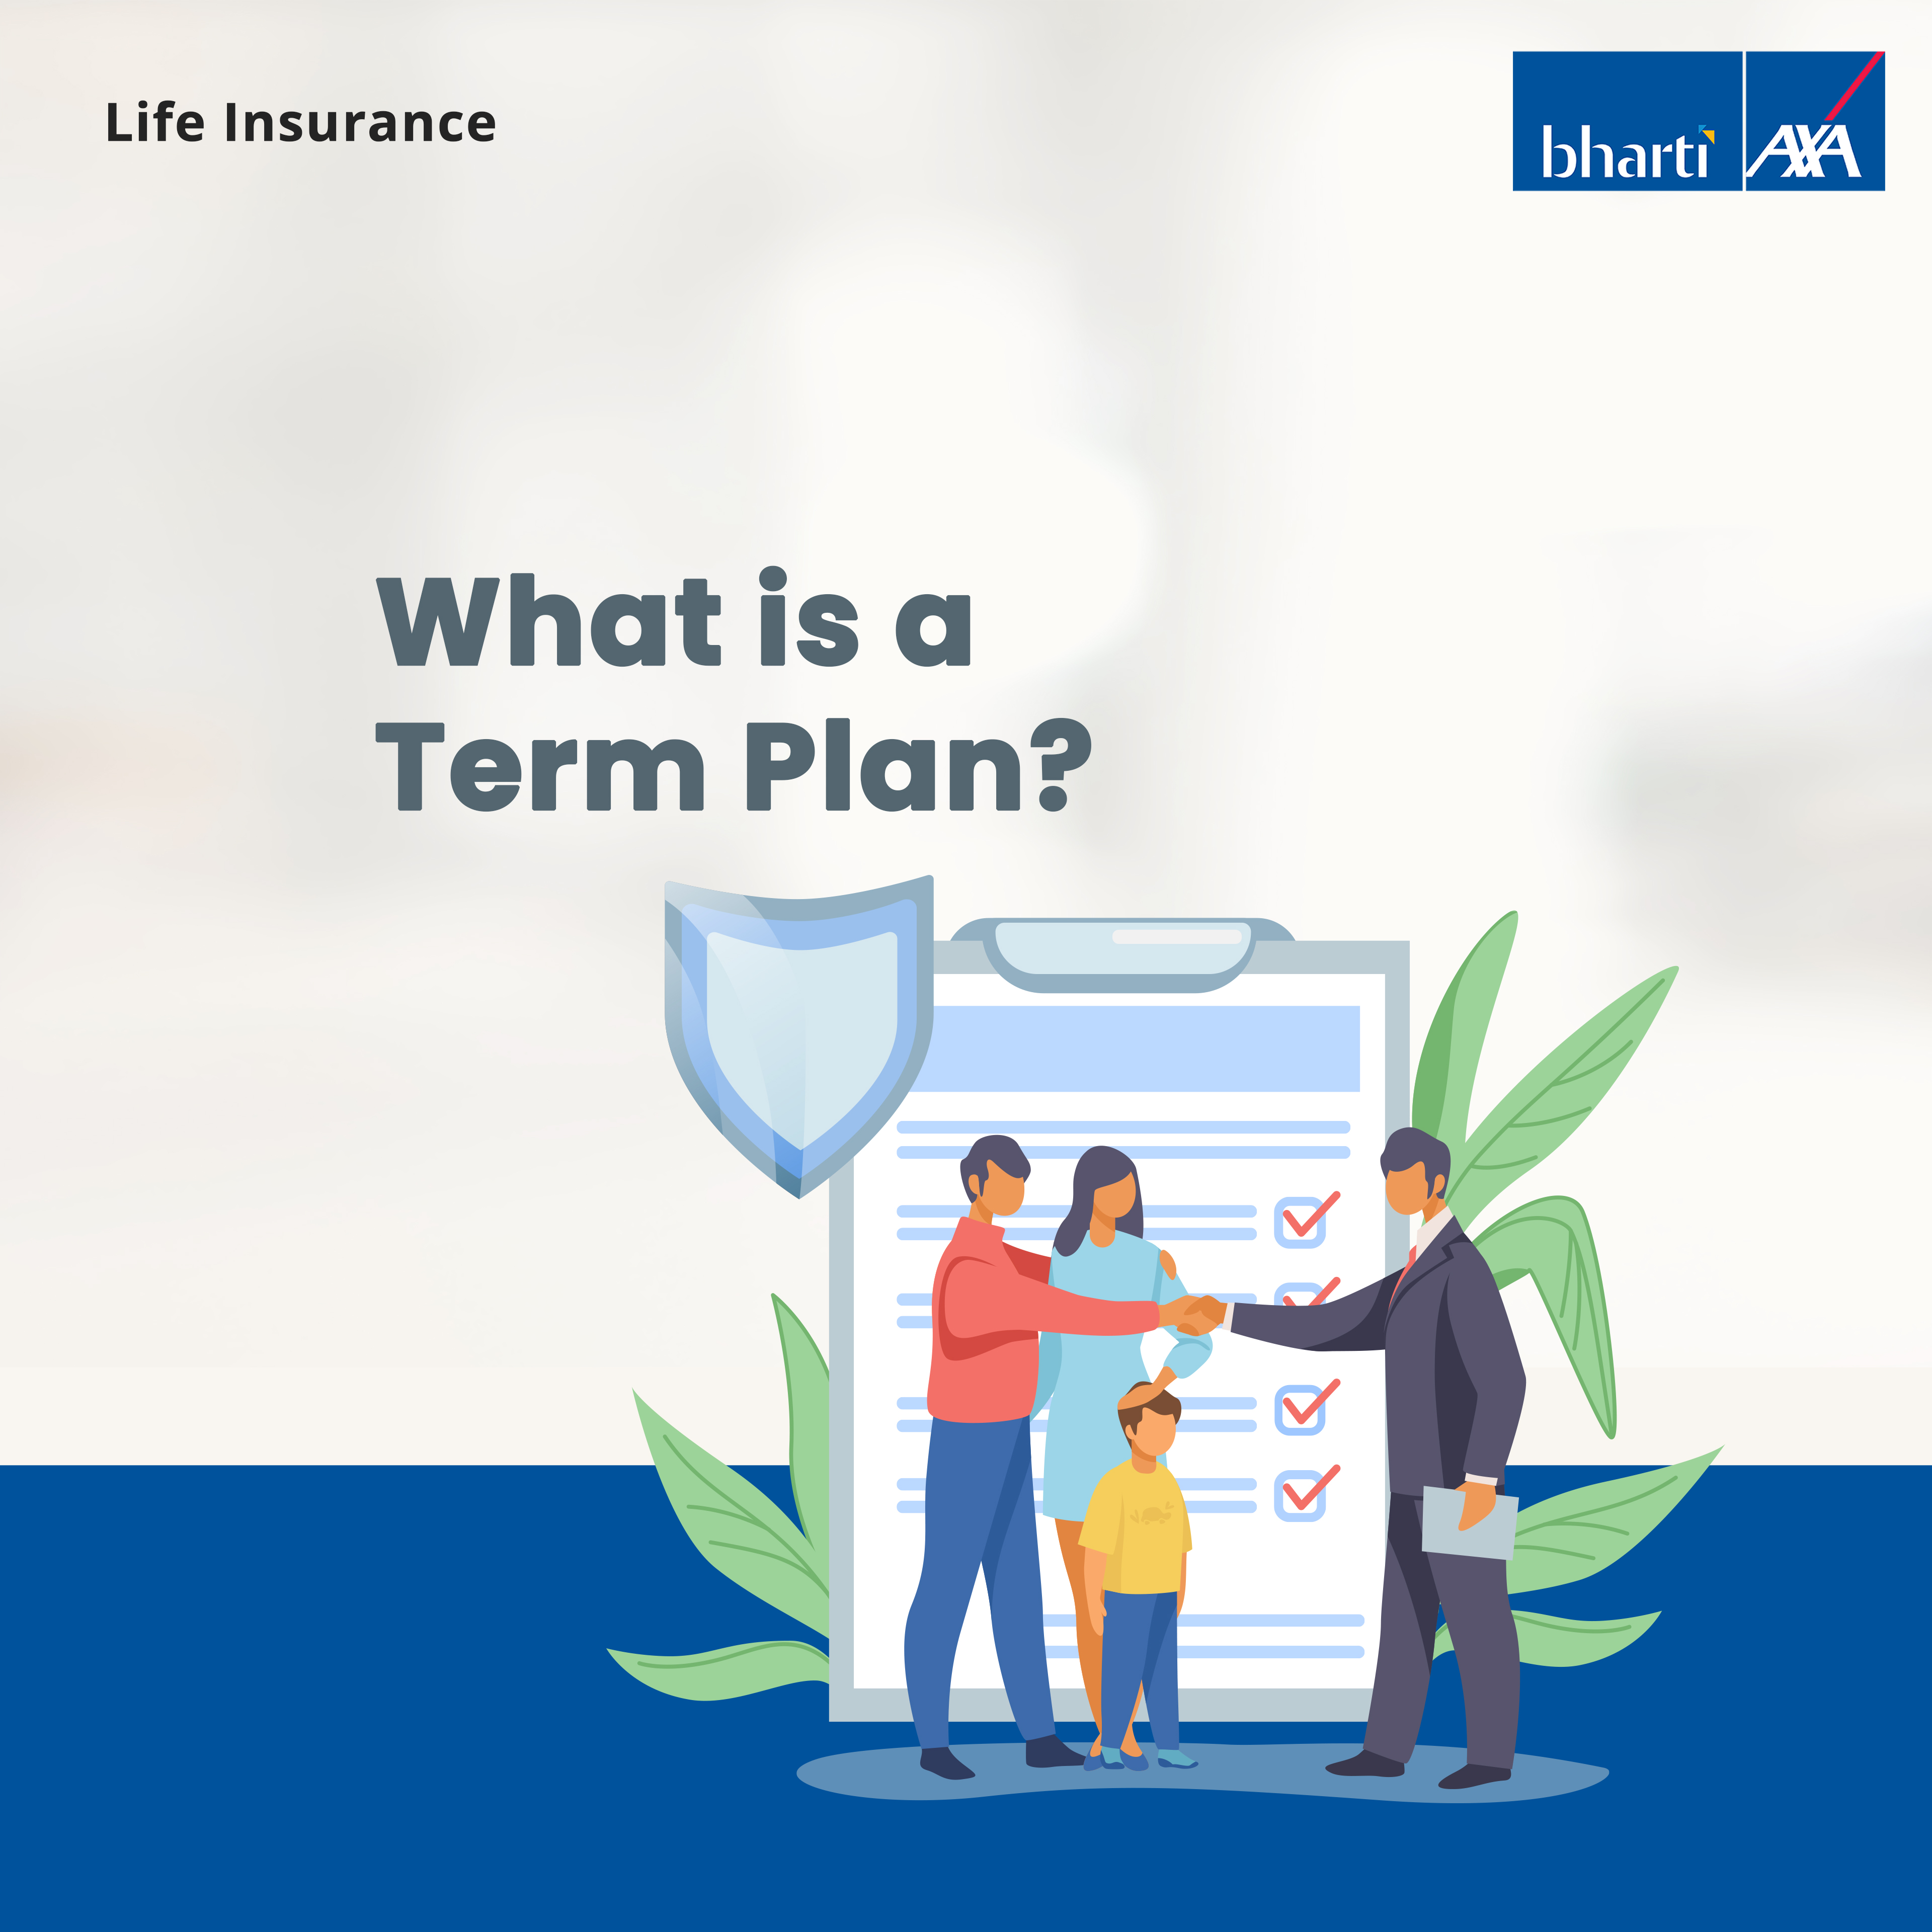 Term Plan a type of Life Insurance with a good coverage